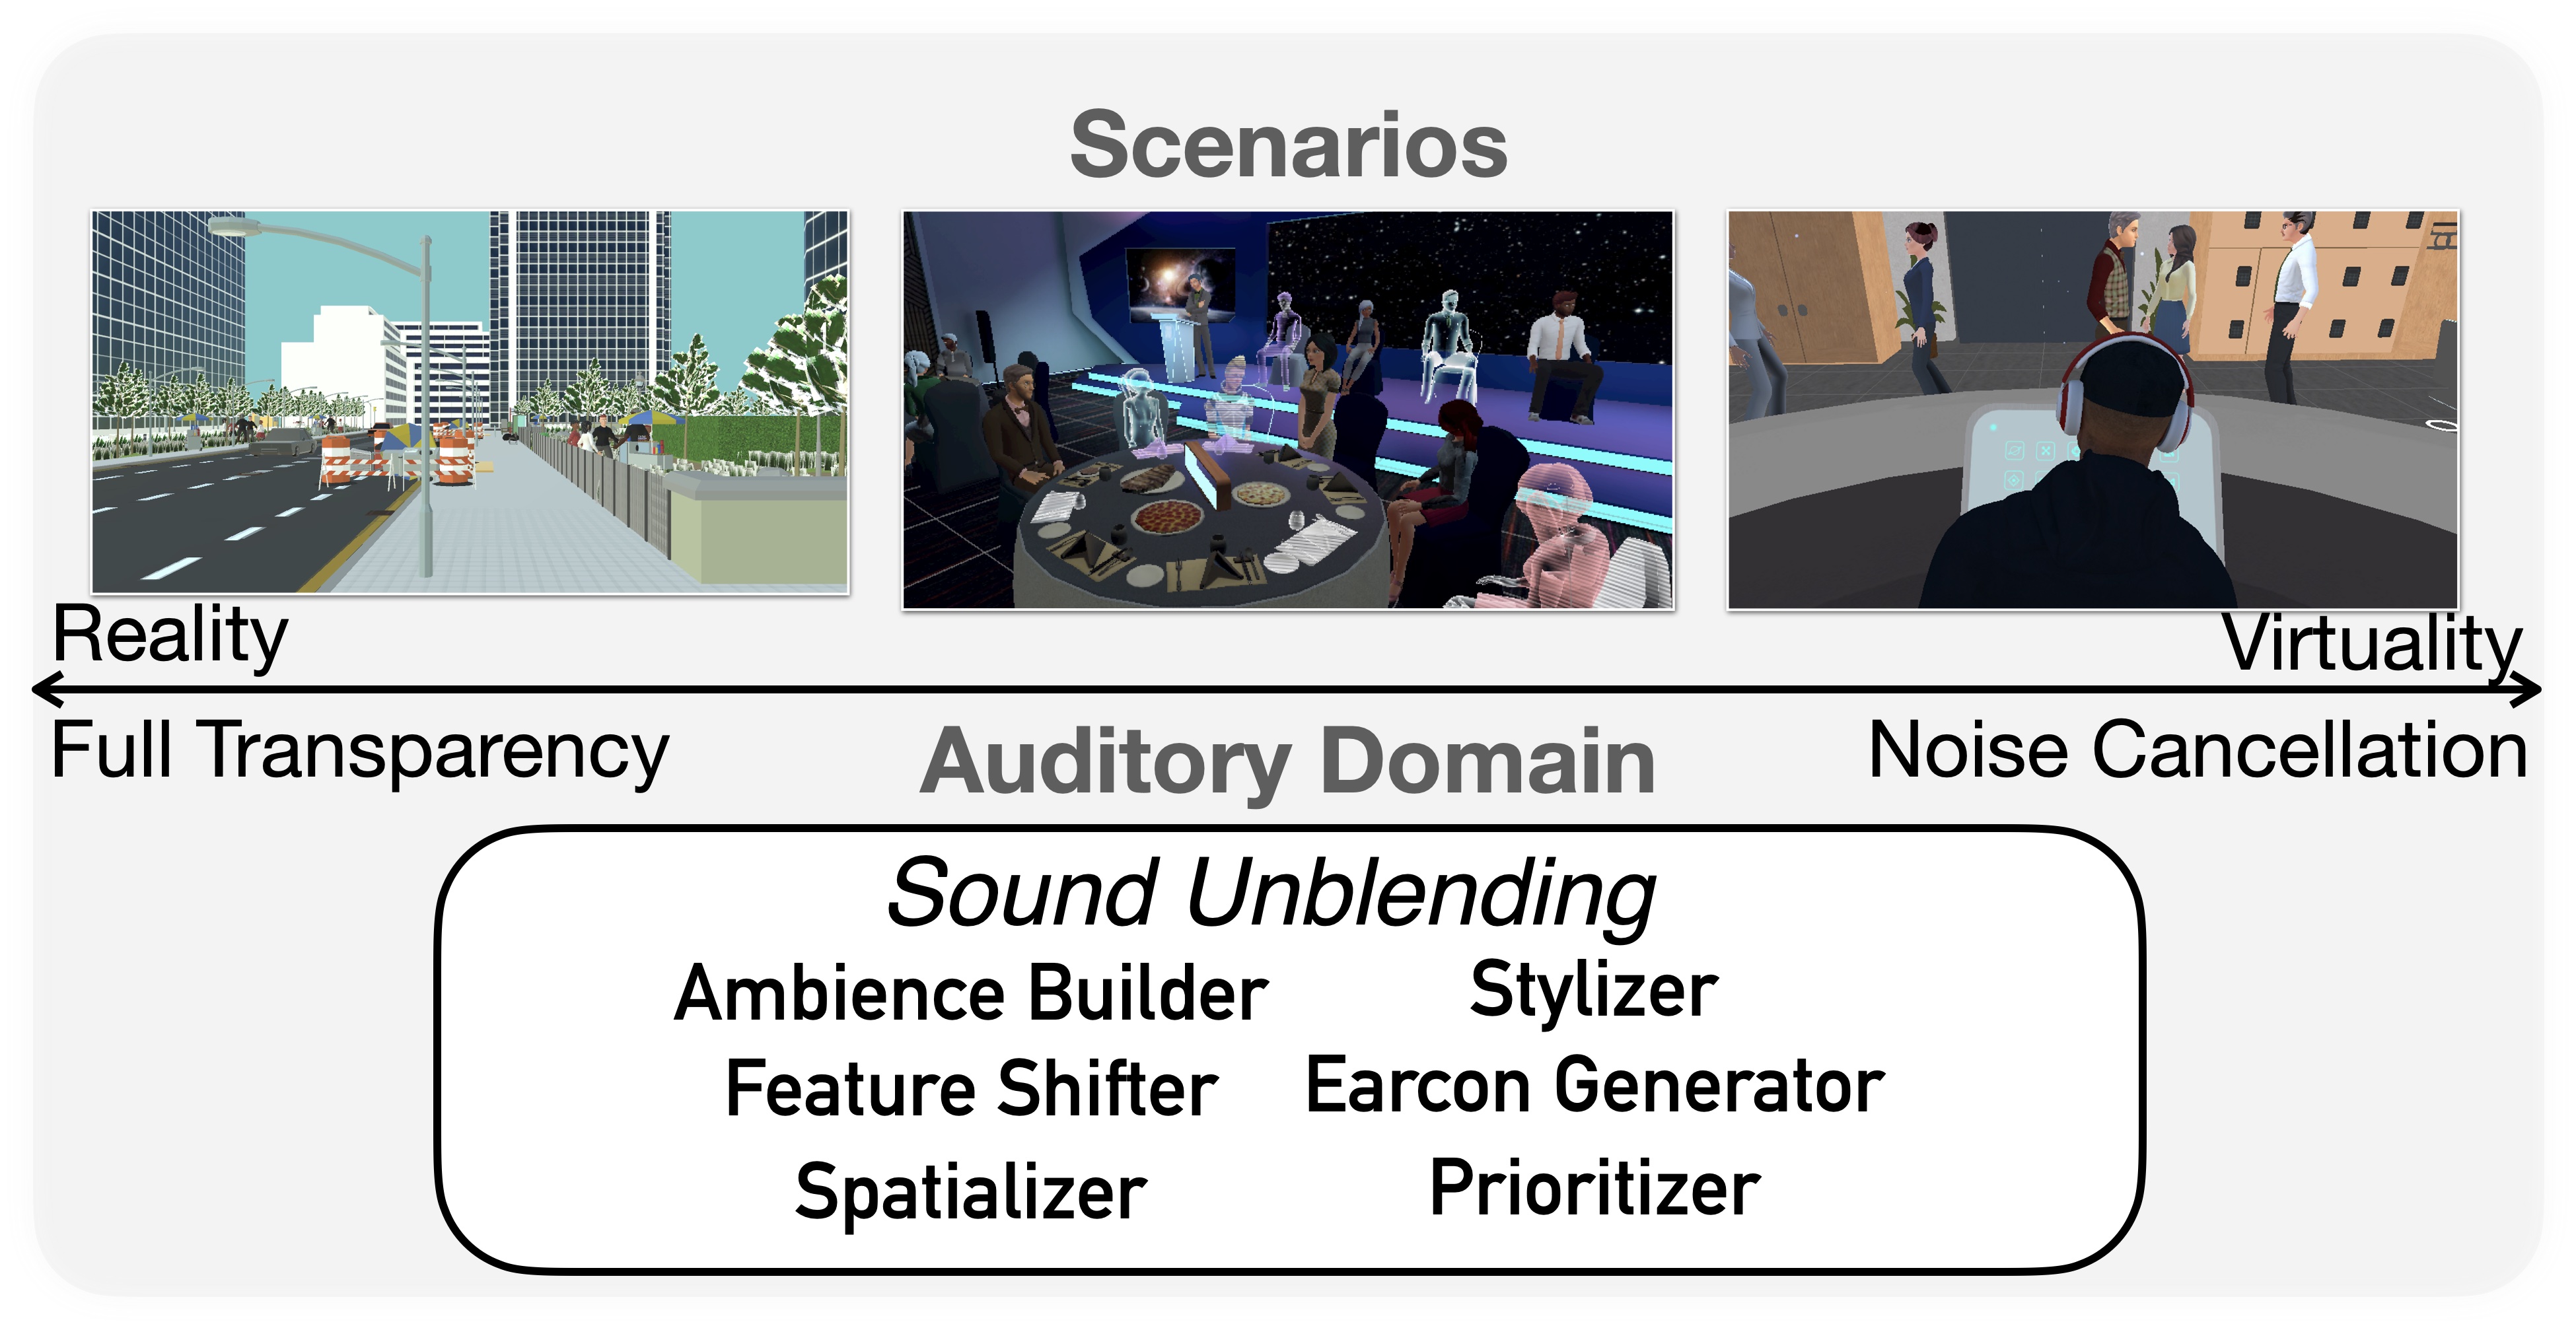 We present Sound Unblending, a concept to manipulate sounds for improving mixed-reality awareness. Sound Unblending situates in the auditory Reality-Virtuality Continuum with full transparency and noise cancellation as two ends, and comprises six sound manipulators: Ambience Builder, Feature Shifter, Stylizer, Spatializer, Earcon Generator, and Prioritizer.